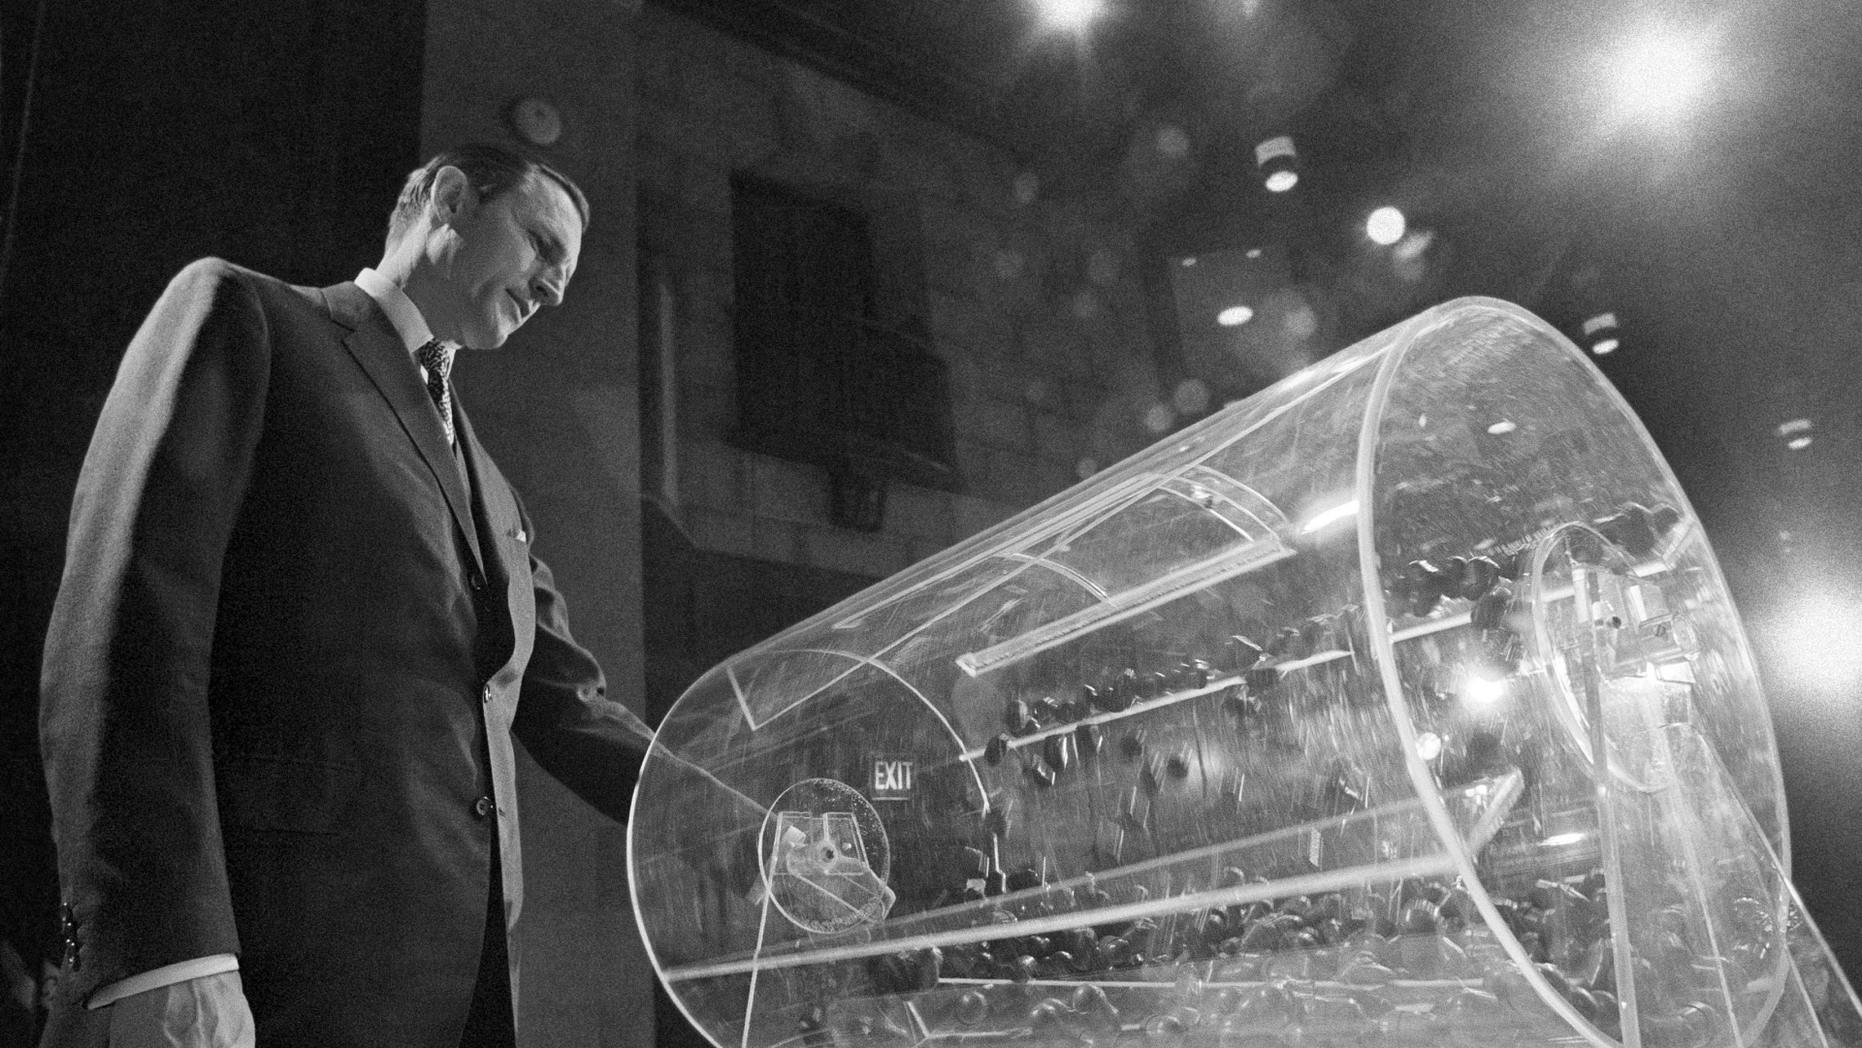 File - This file of February 2, 1972 shows the project director, Curtis W. Tarr, spinning one of the two plexiglass drums in Washington at the time of the launch of the fourth annual selective service lottery. The chairman of a group to review the changes to the US military project said Monday, February 25, 2019 that his recommendations to Congress would not be influenced by the recent decision of a federal judge that the current system is unconstitutional, because it only applies to men. The army has recruited no one in its service for more than 40 years, but American men still have to register at 18 years old. Recent efforts to make registration mandatory for women have also sparked intense debate in Washington. (AP Photo / Charles W. Harrity, File)